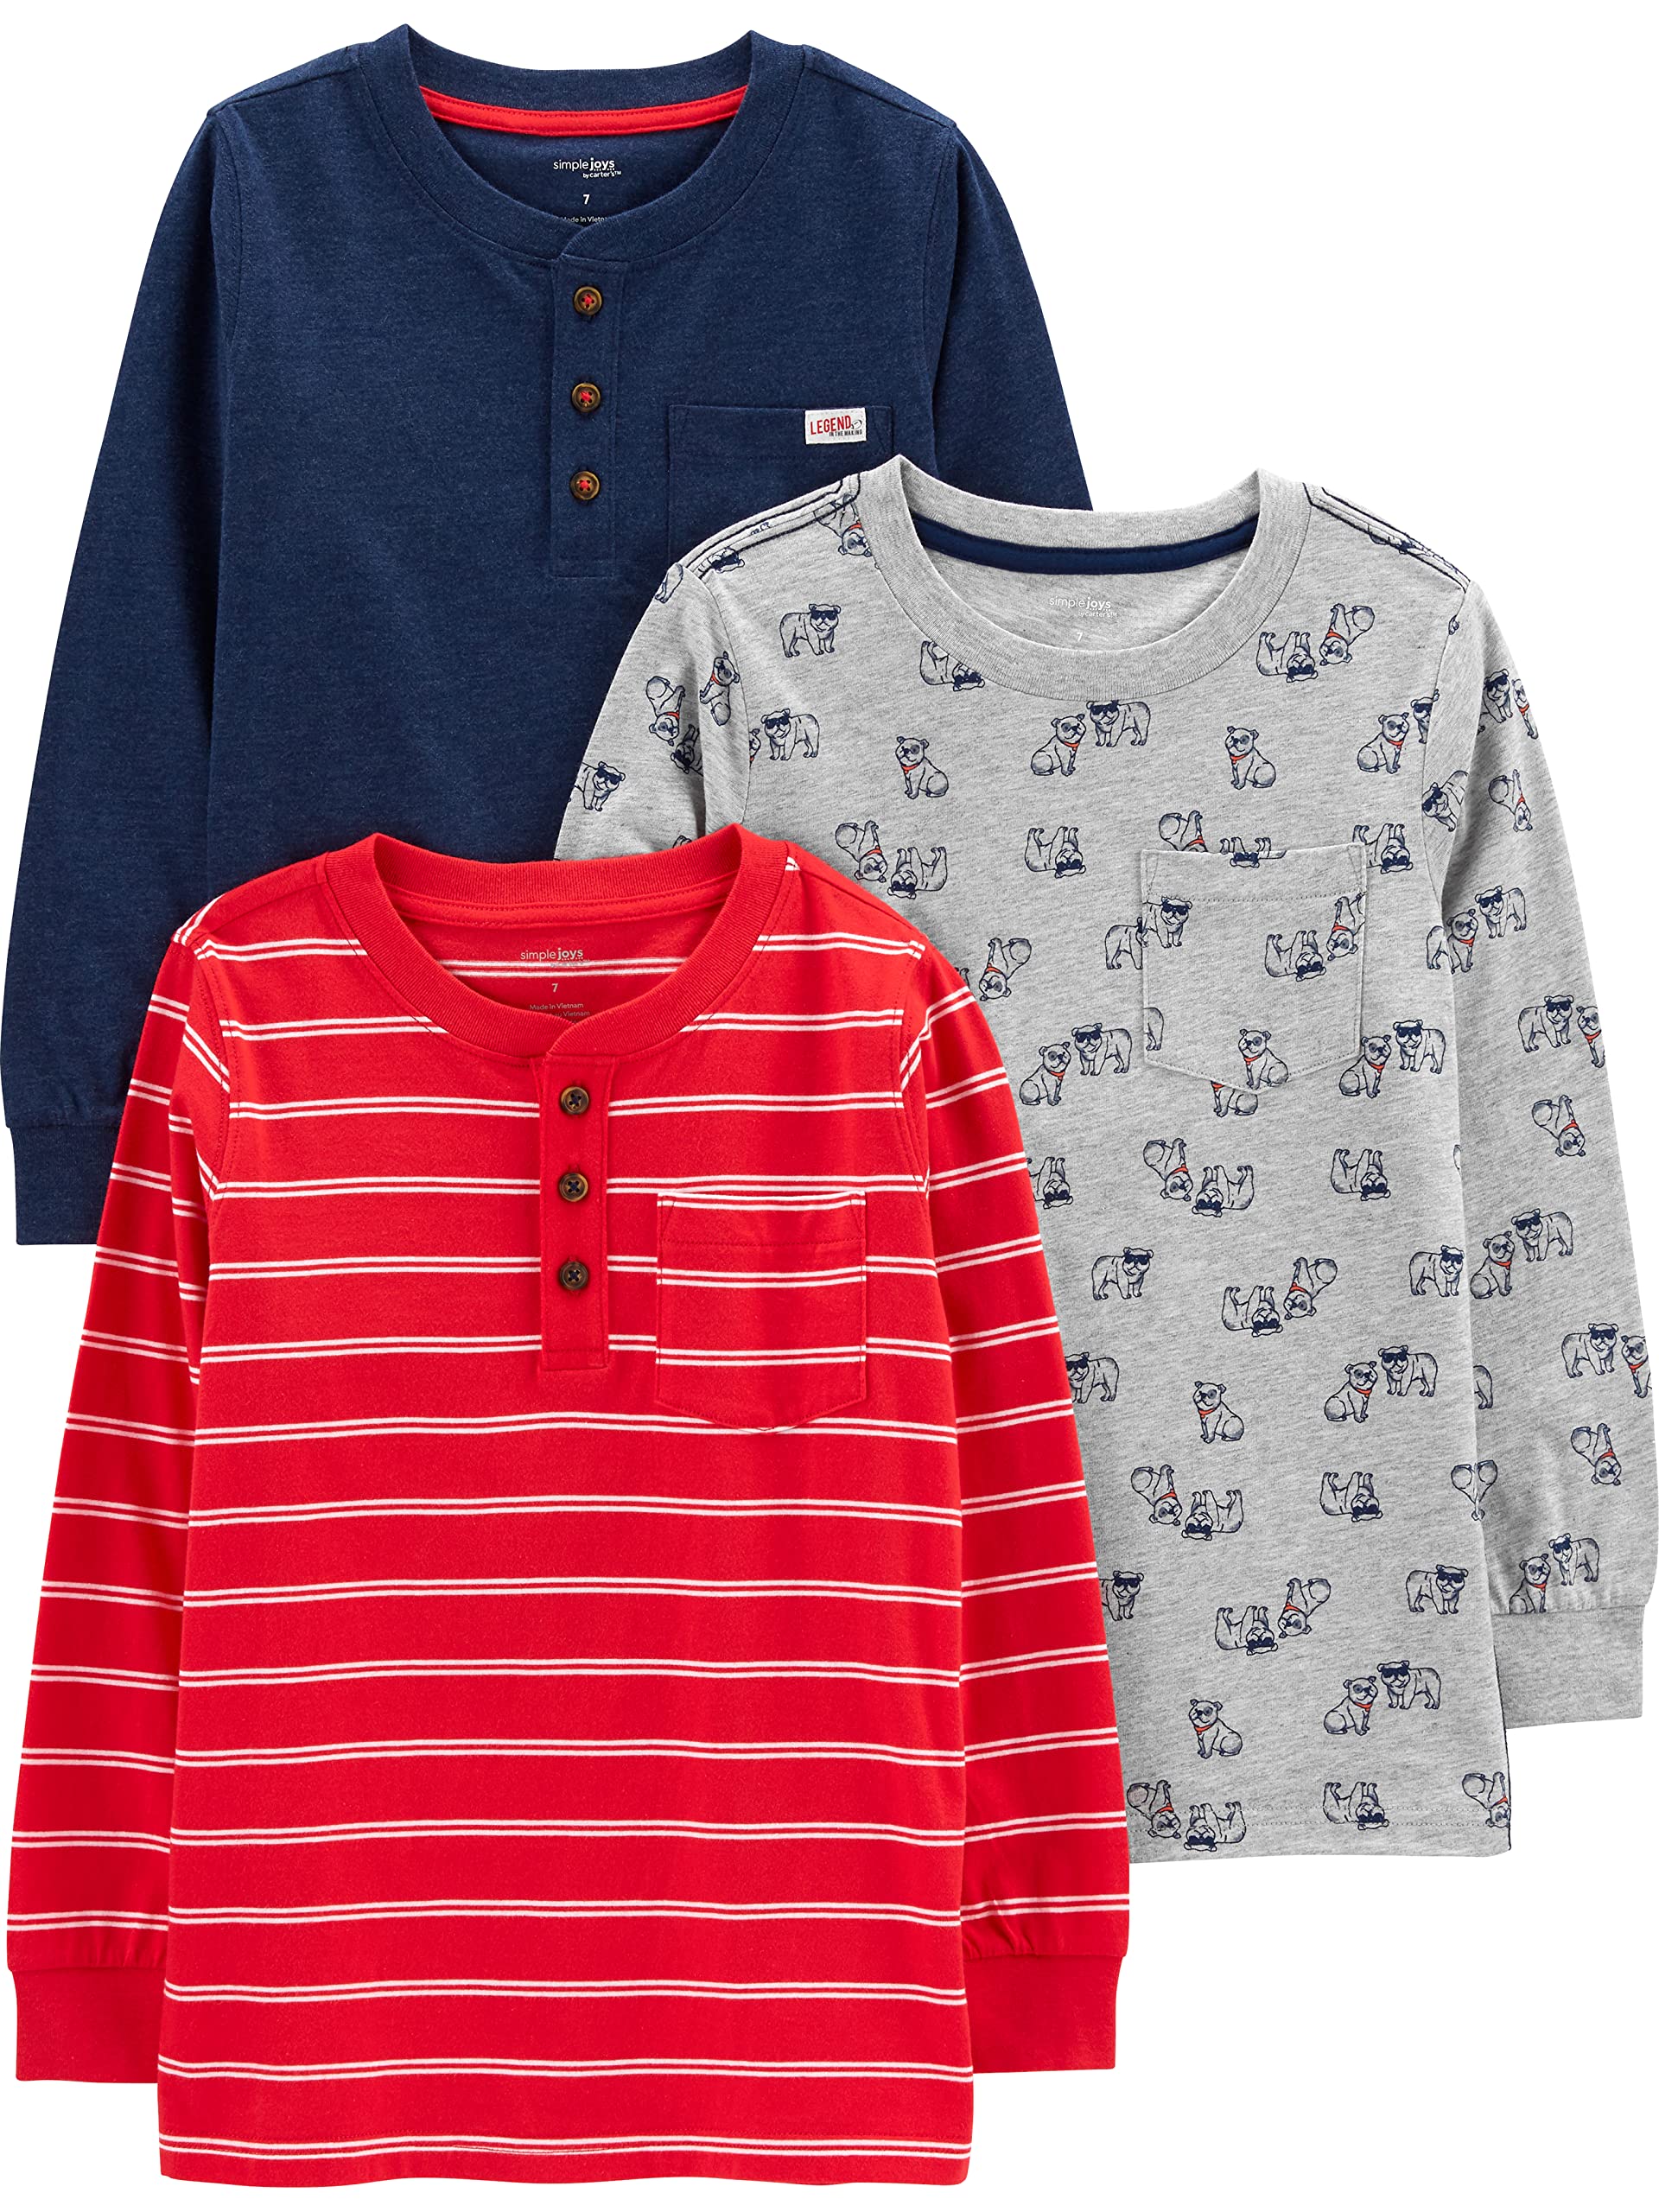 Simple Joys by Carter's Boys' Long-Sleeve Shirts, Pack of 3